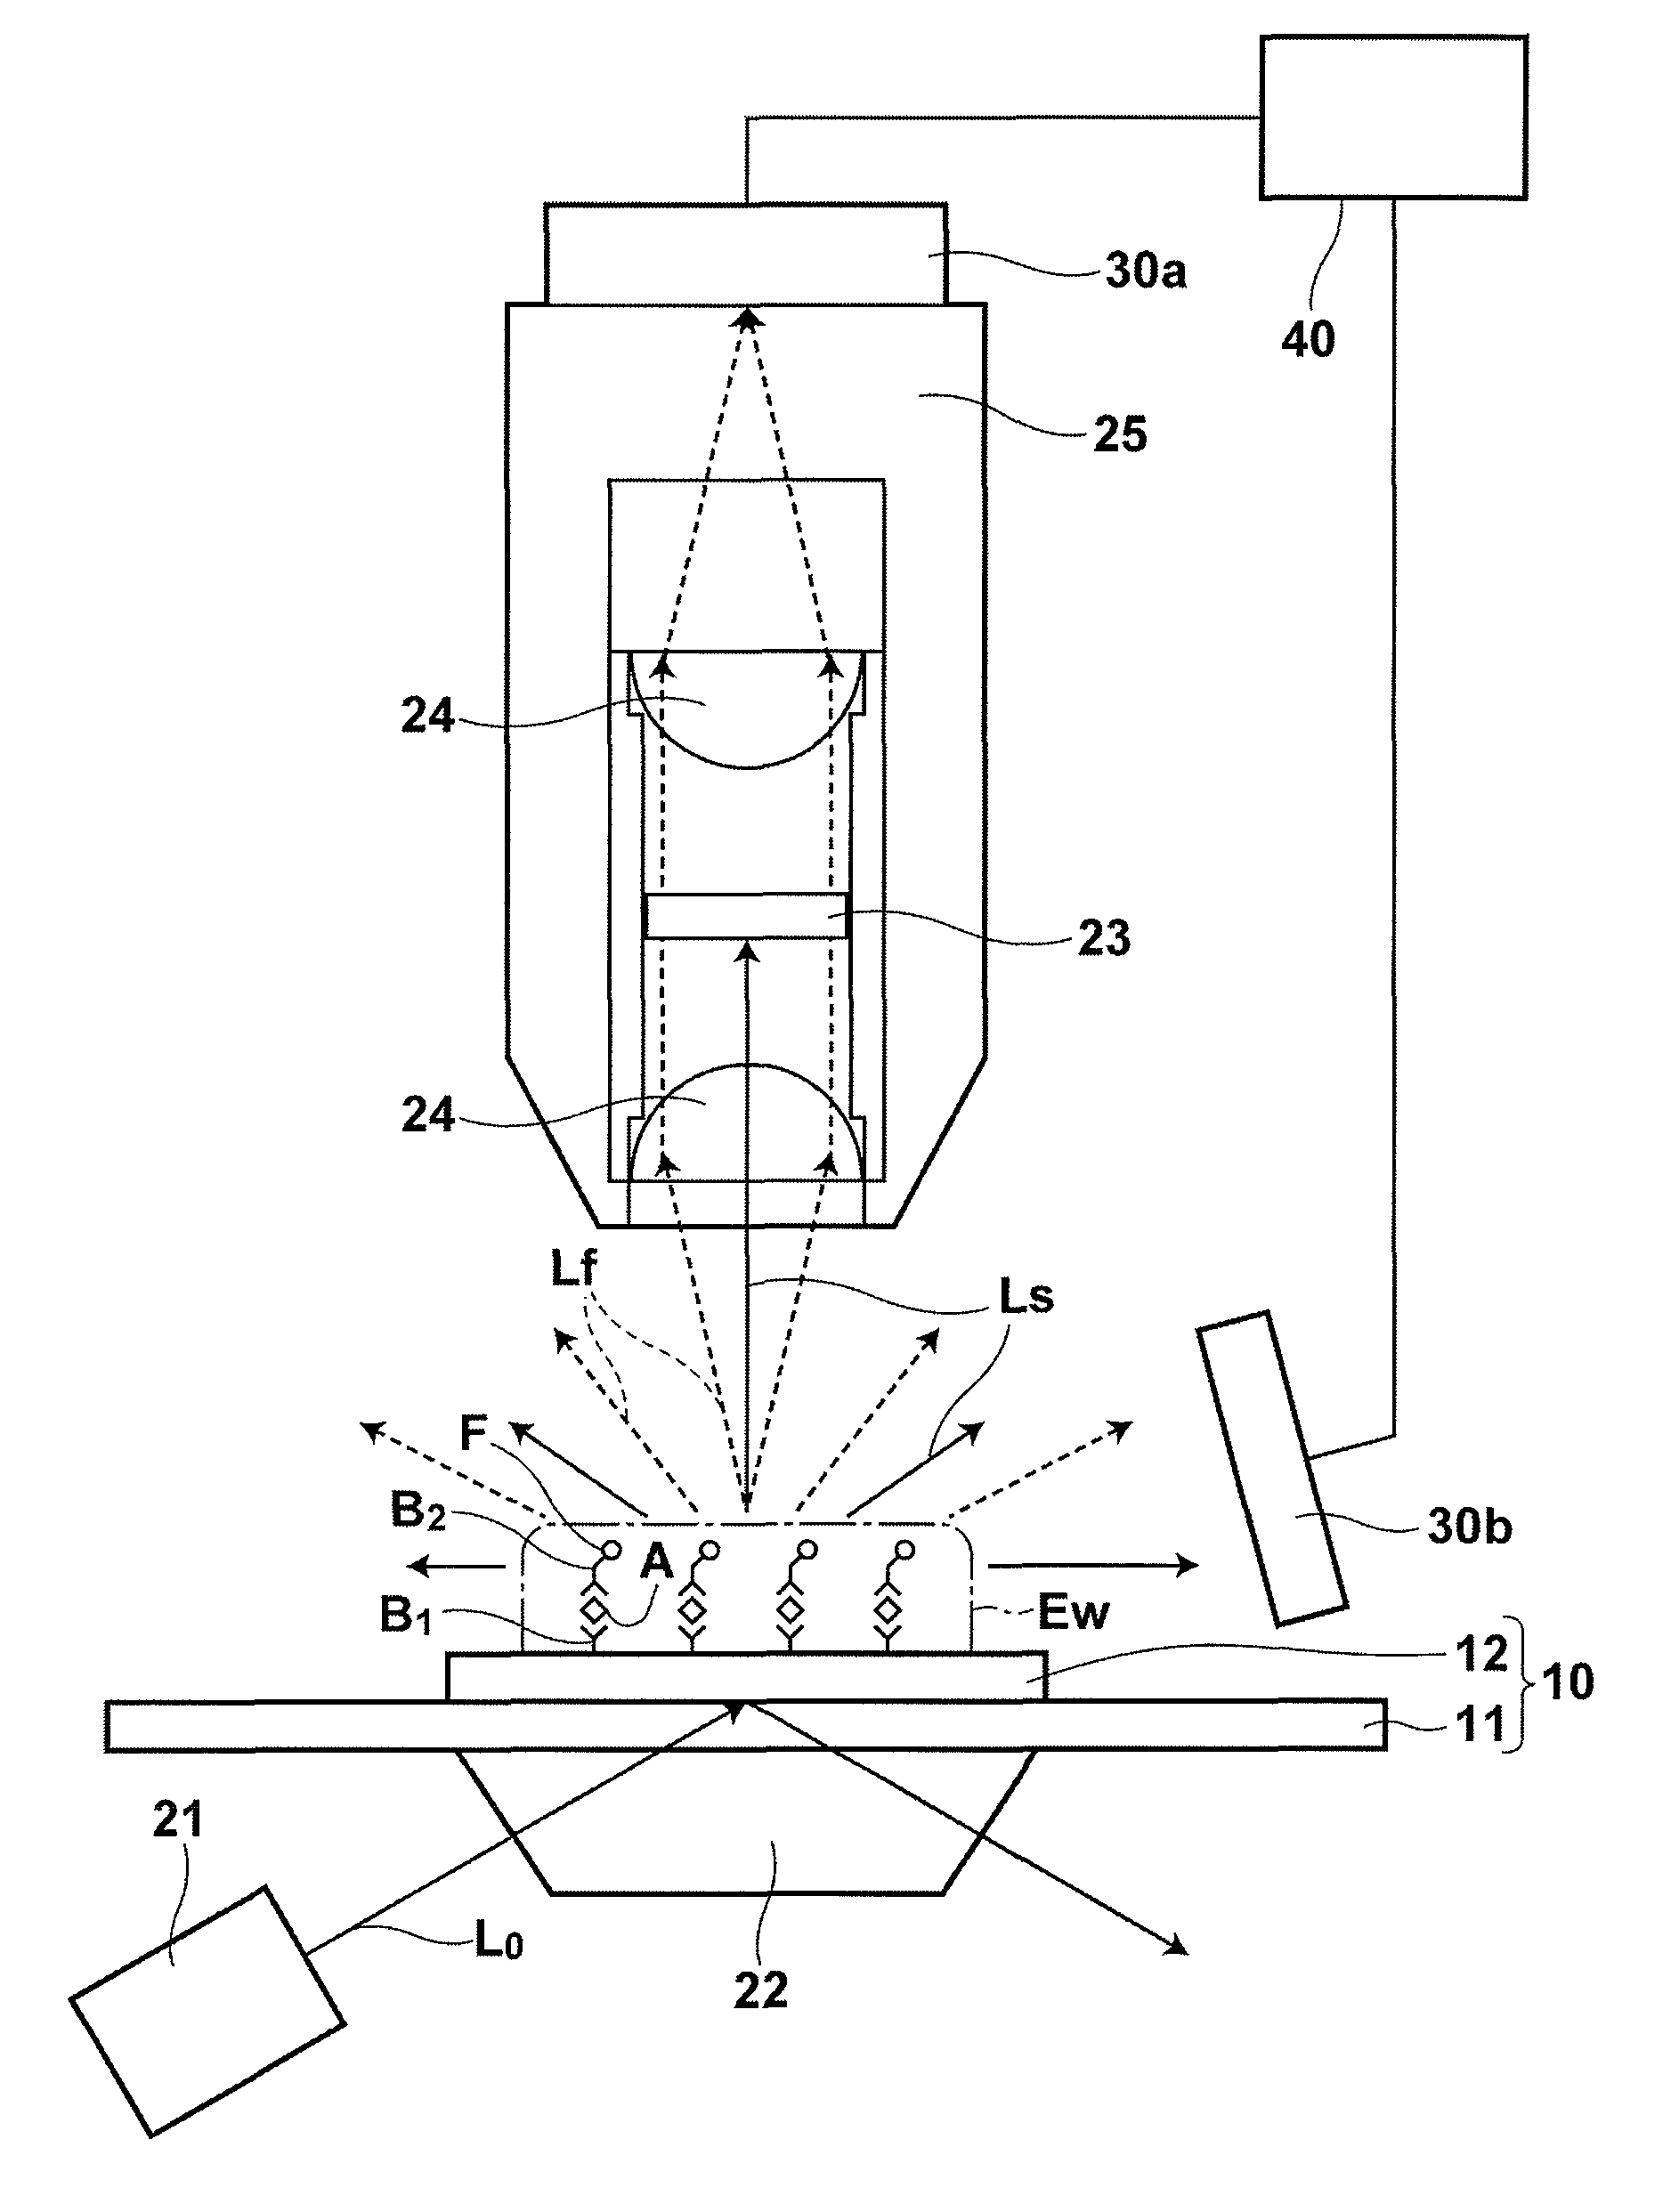 Fluorescence detecting method and fluorescence detecting apparatus